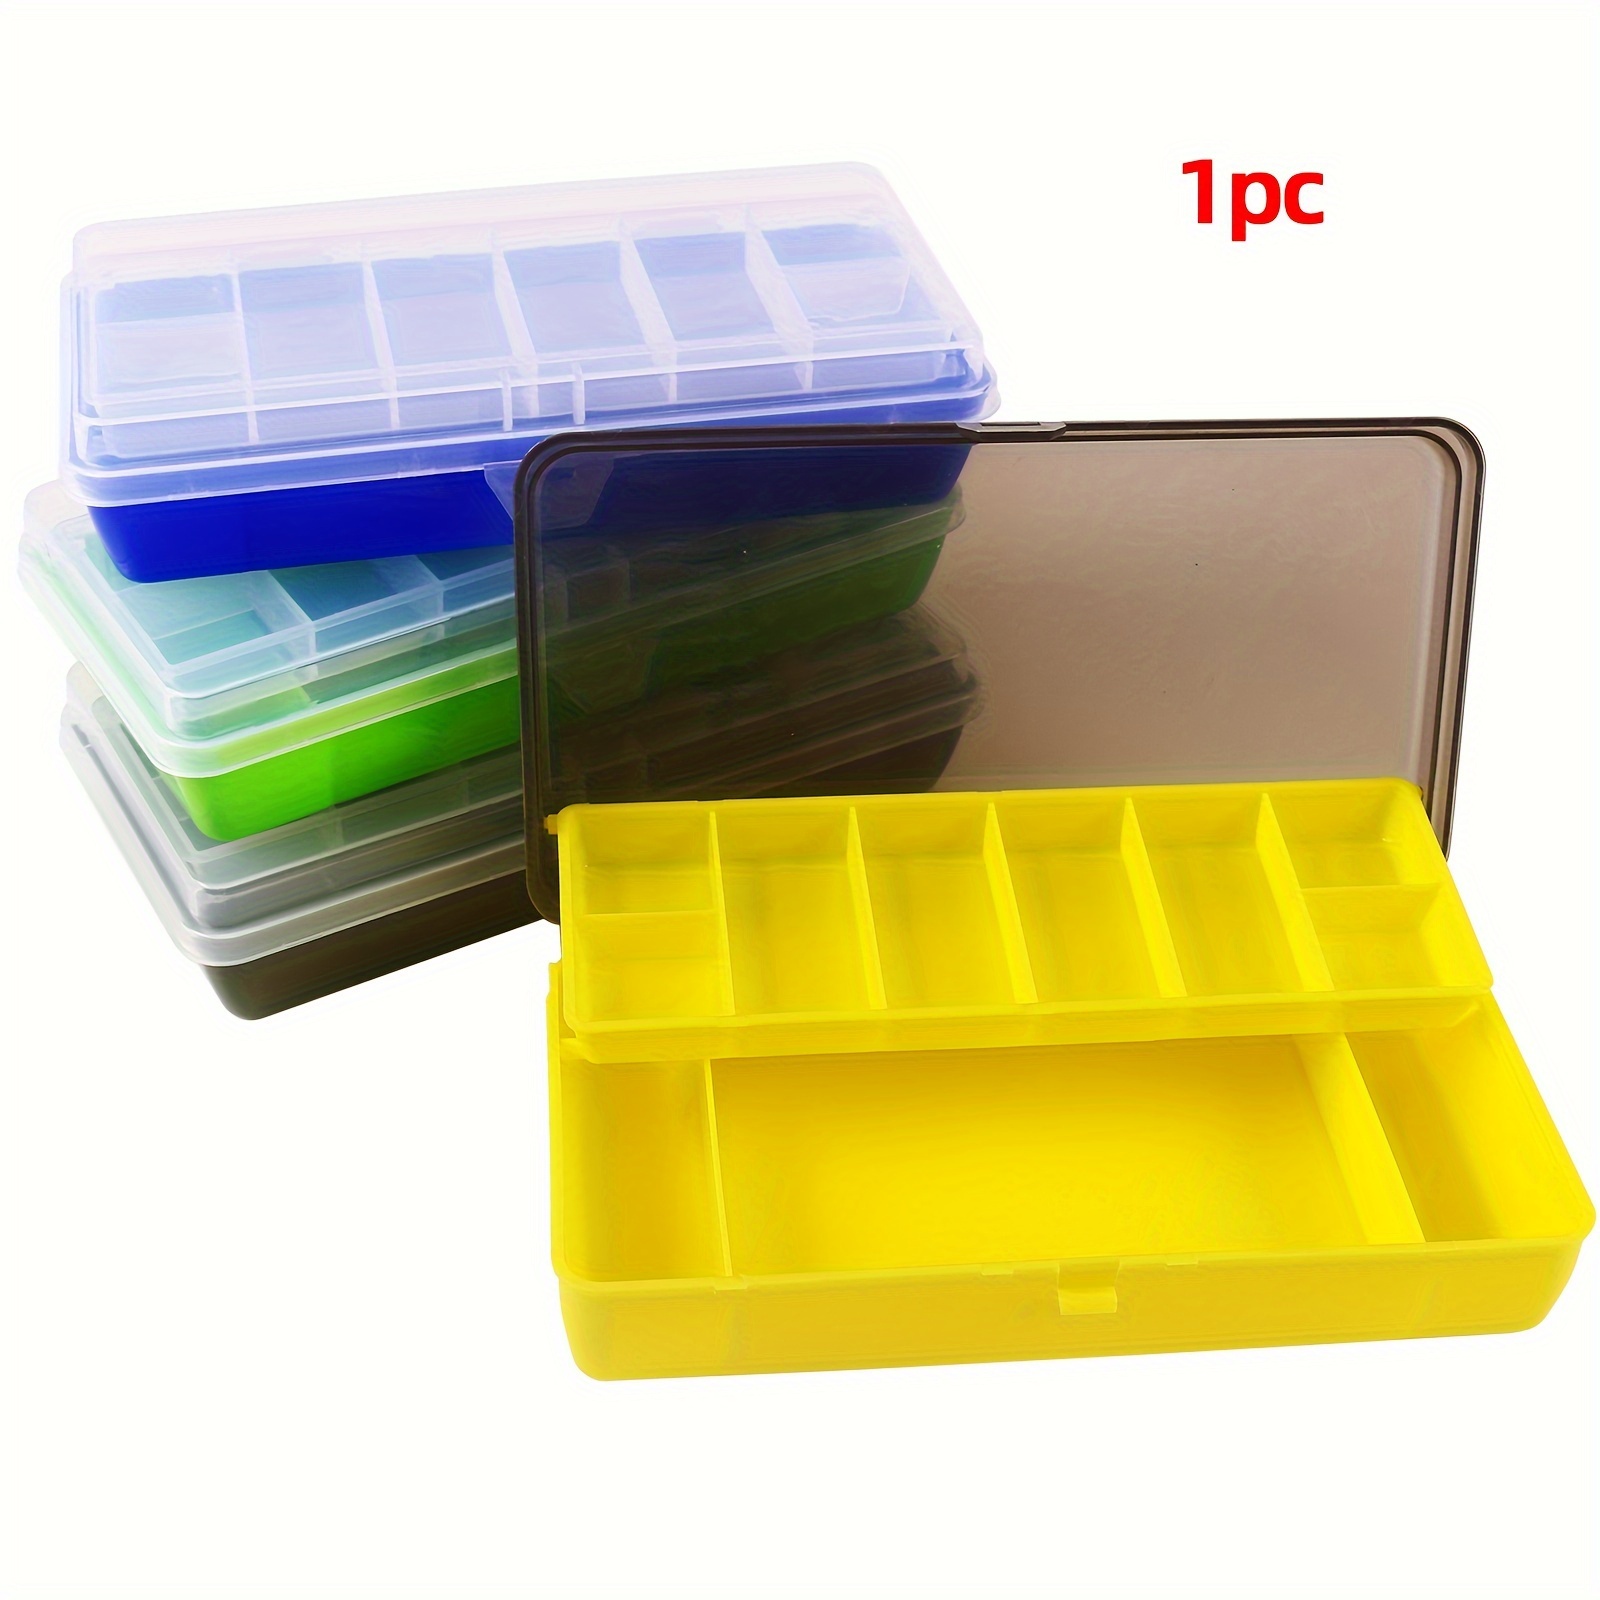 

1pc Double-layer Tackle Box, Fishing Bait Box, Plastic Storage Box For Fishing Accessories